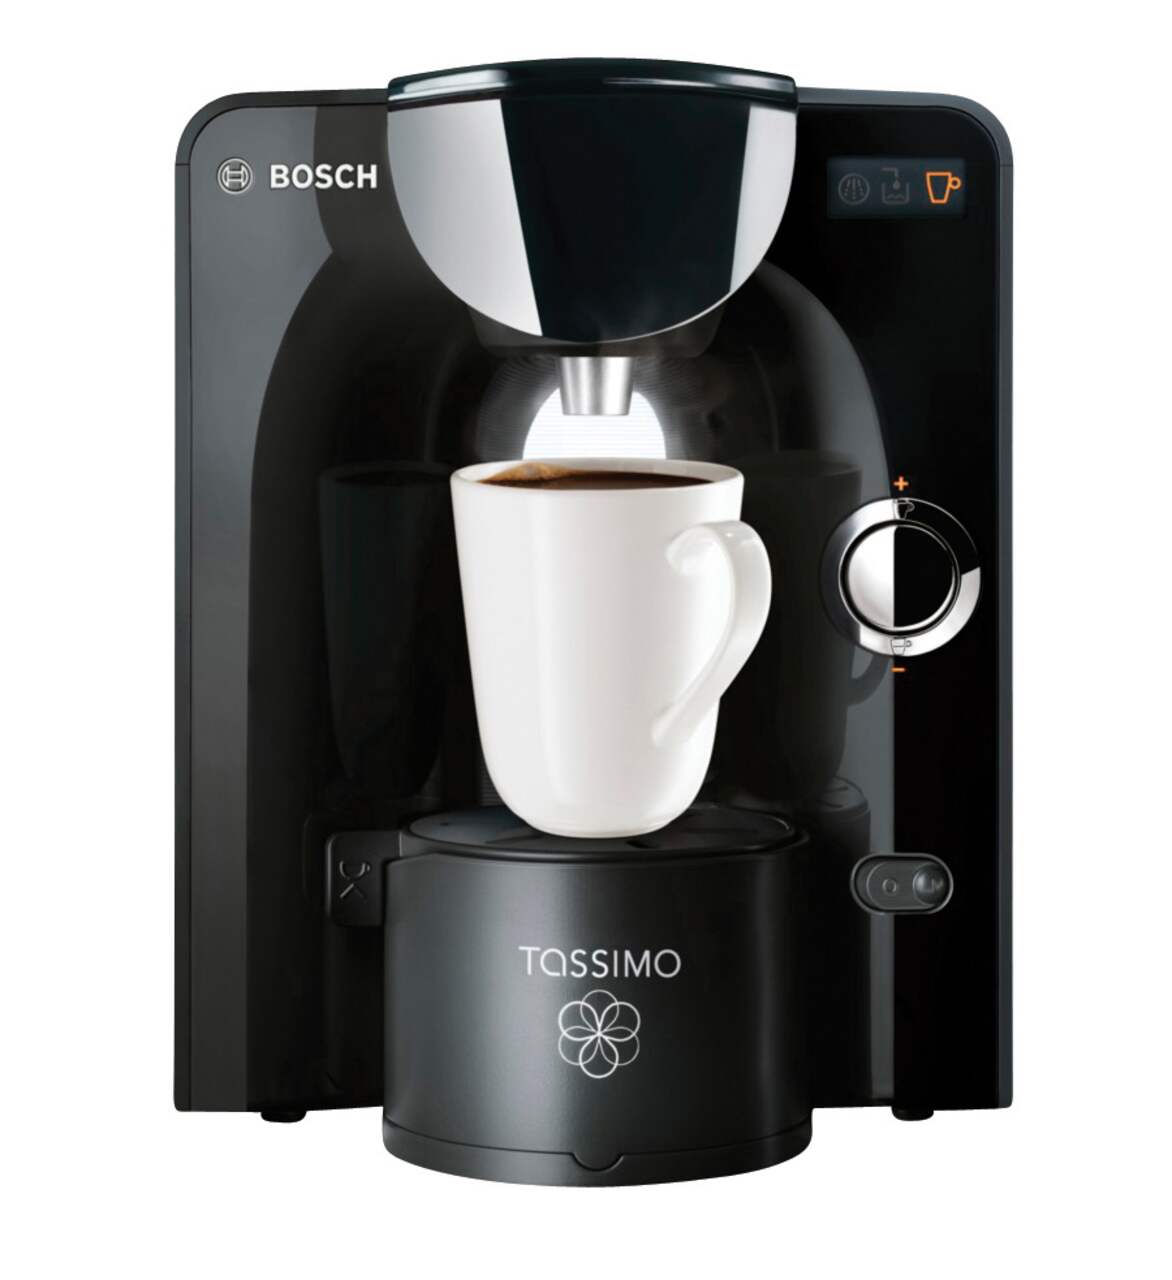 https://media-www.canadiantire.ca/product/living/kitchen/kitchen-appliances/0430053/tassimo-t55--8ef8732b-7492-42e2-a6e9-ca4bcc65b387.png?imdensity=1&imwidth=640&impolicy=mZoom